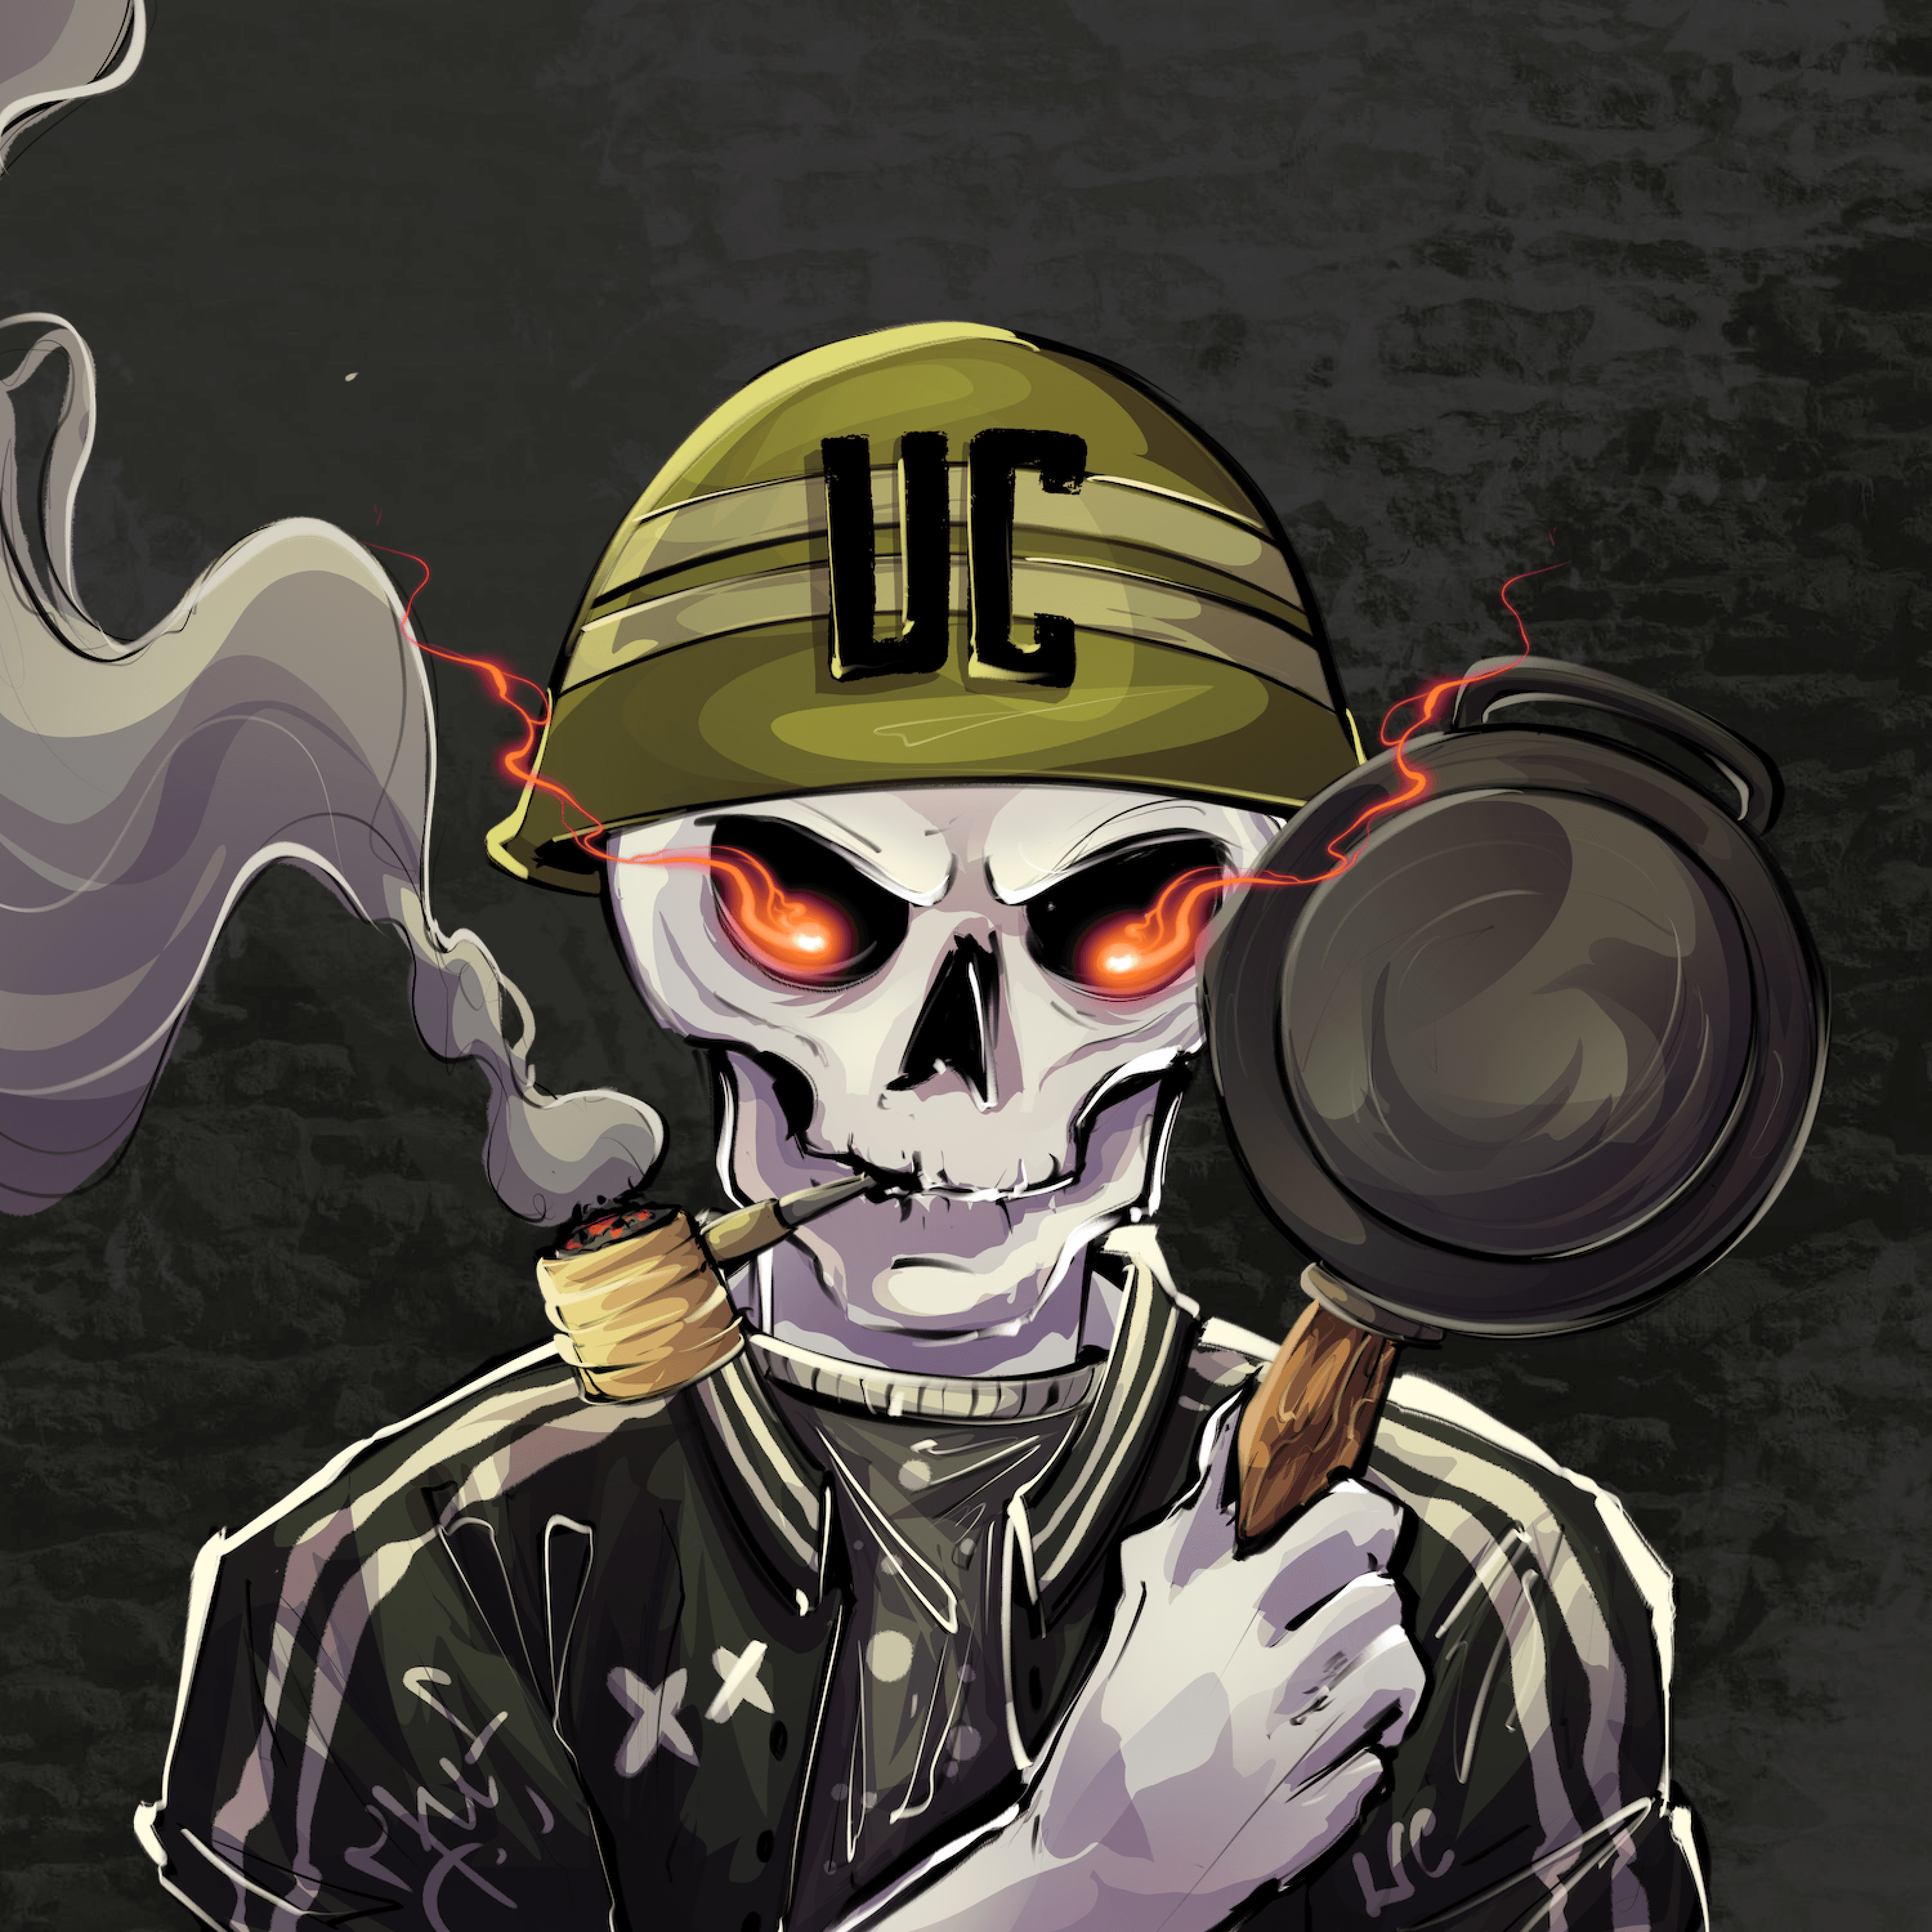 Undead Chefs #2067